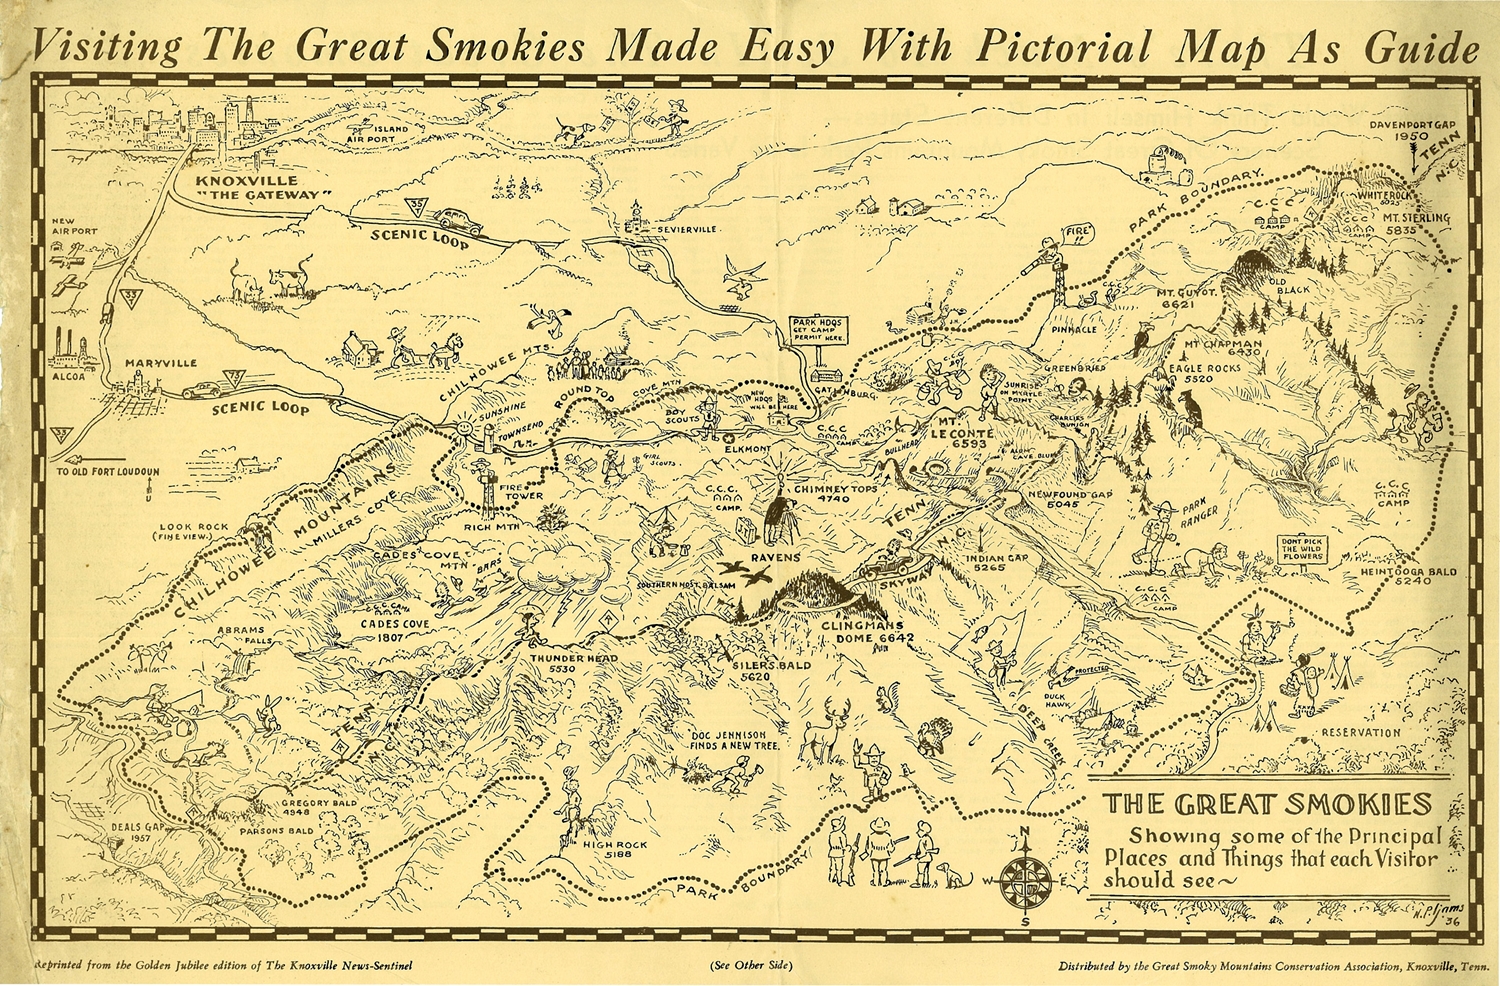 Great Smokies Map drawn by Harry Ijams, as featured in the Knoxville News-Sentinel's Golden Jubilee Edition in July, 1936. (Courtesy of the Great Smoky Mountains National park Archive.)